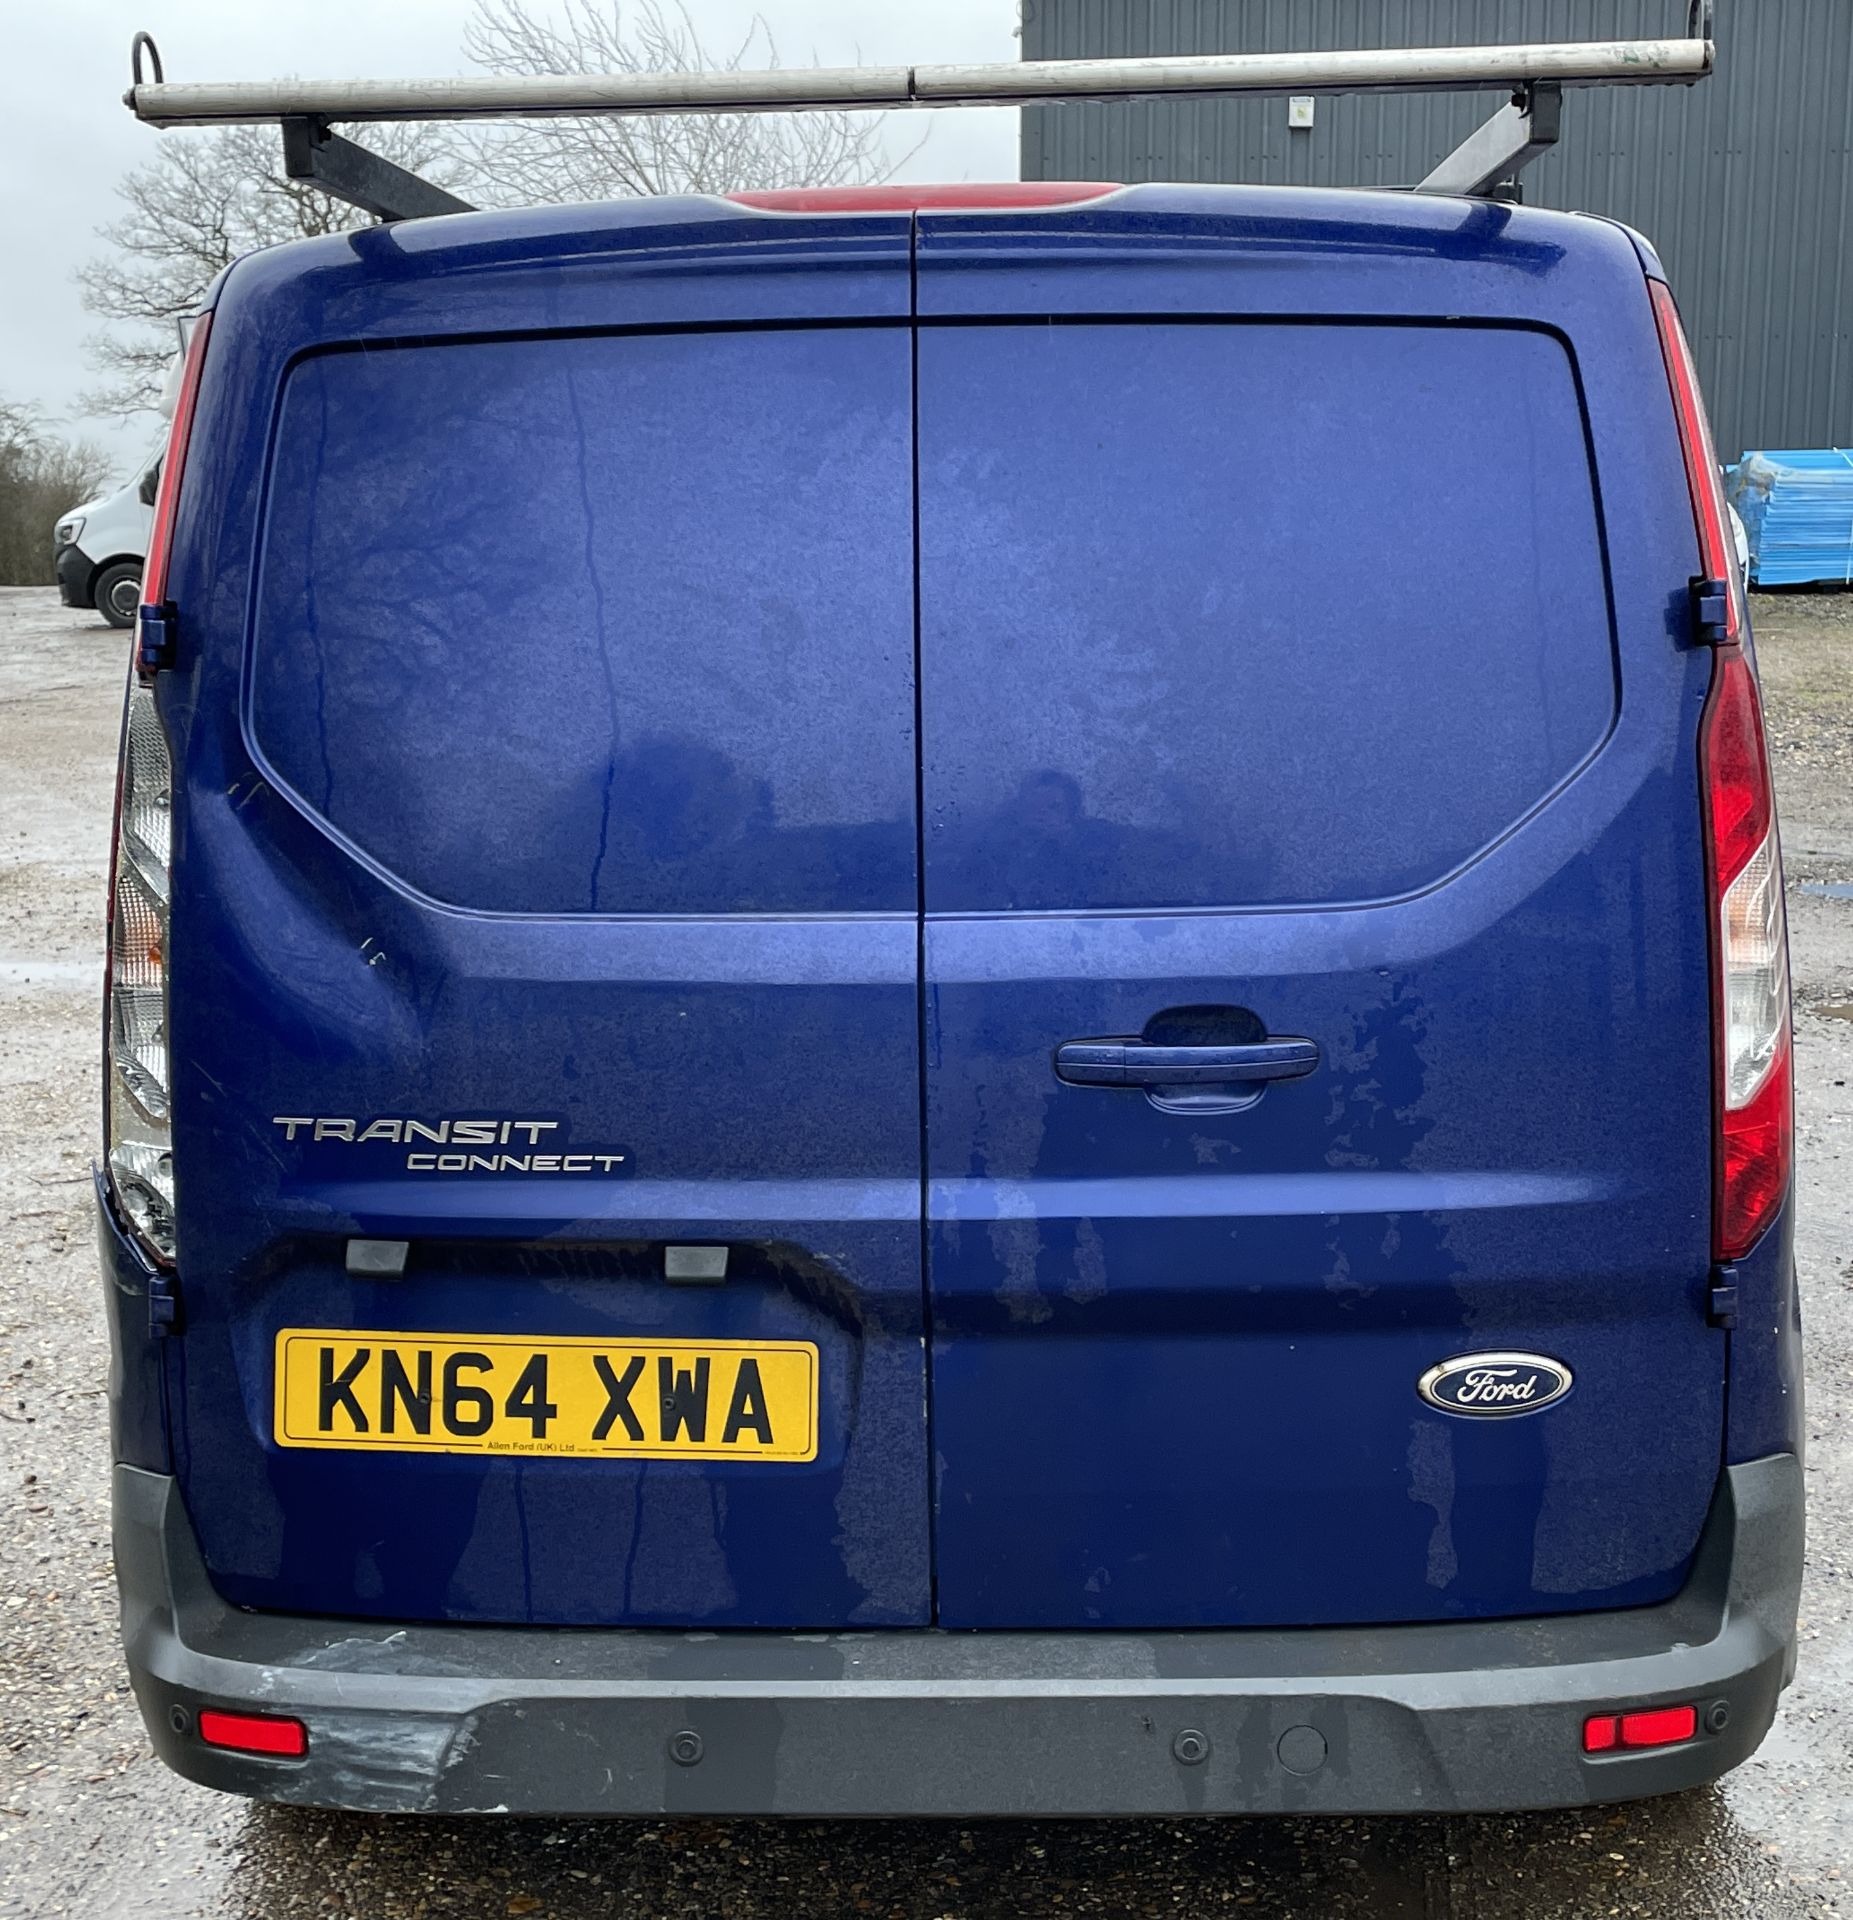 Ford Transit Connect 200 L1 Diesel 1.6 TDCi 115ps, Registration KN64 XWA, 1st Registered 28th - Image 6 of 30